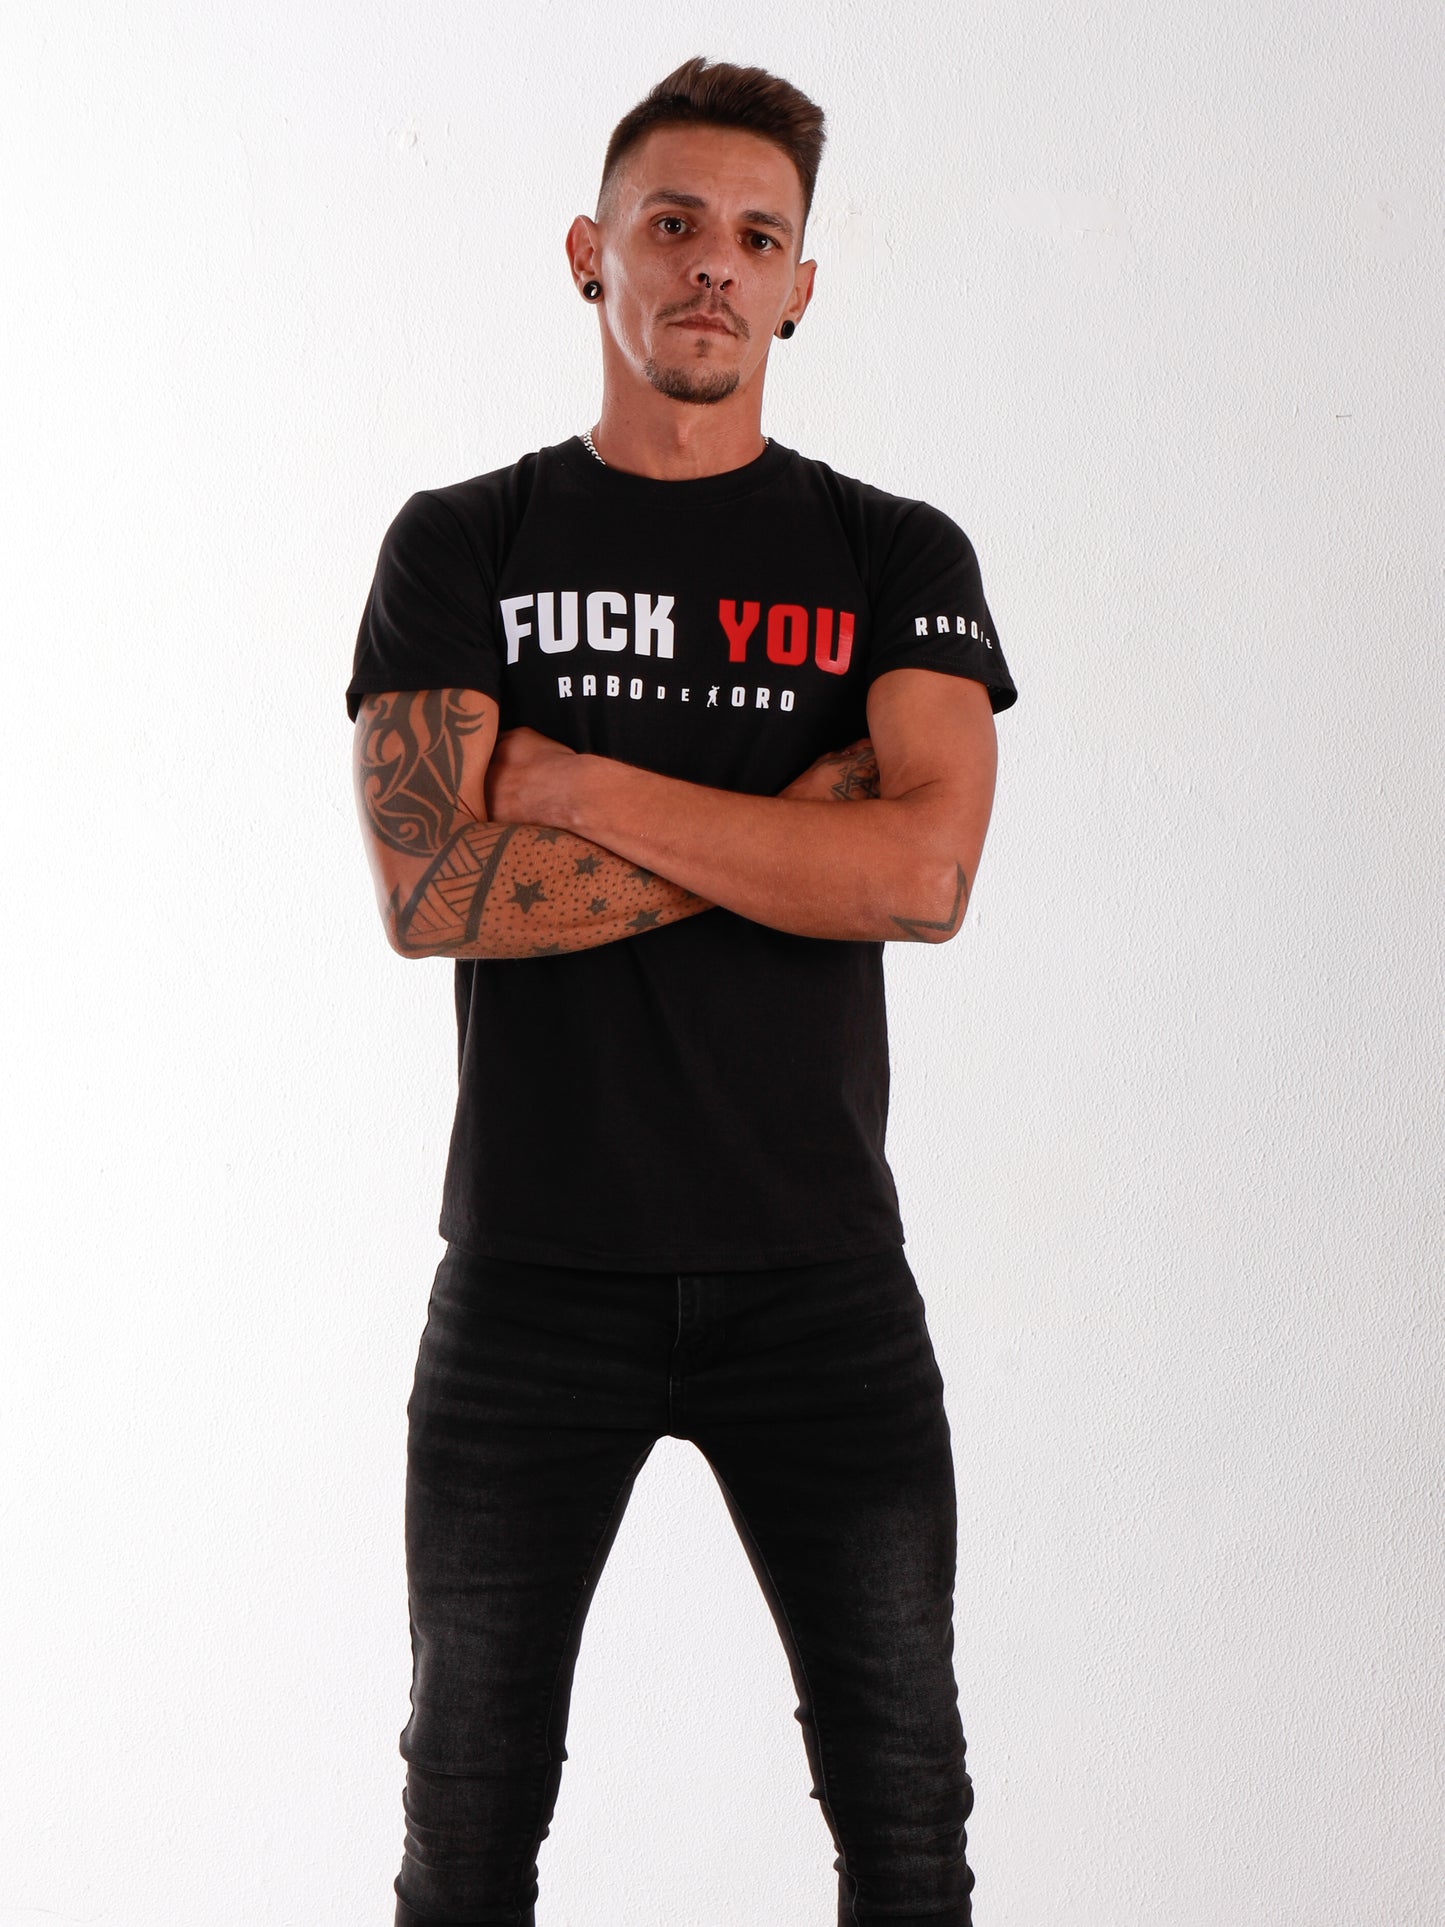 FUCK YOU/ME Double Sided Black T-Shirt with White & Red details